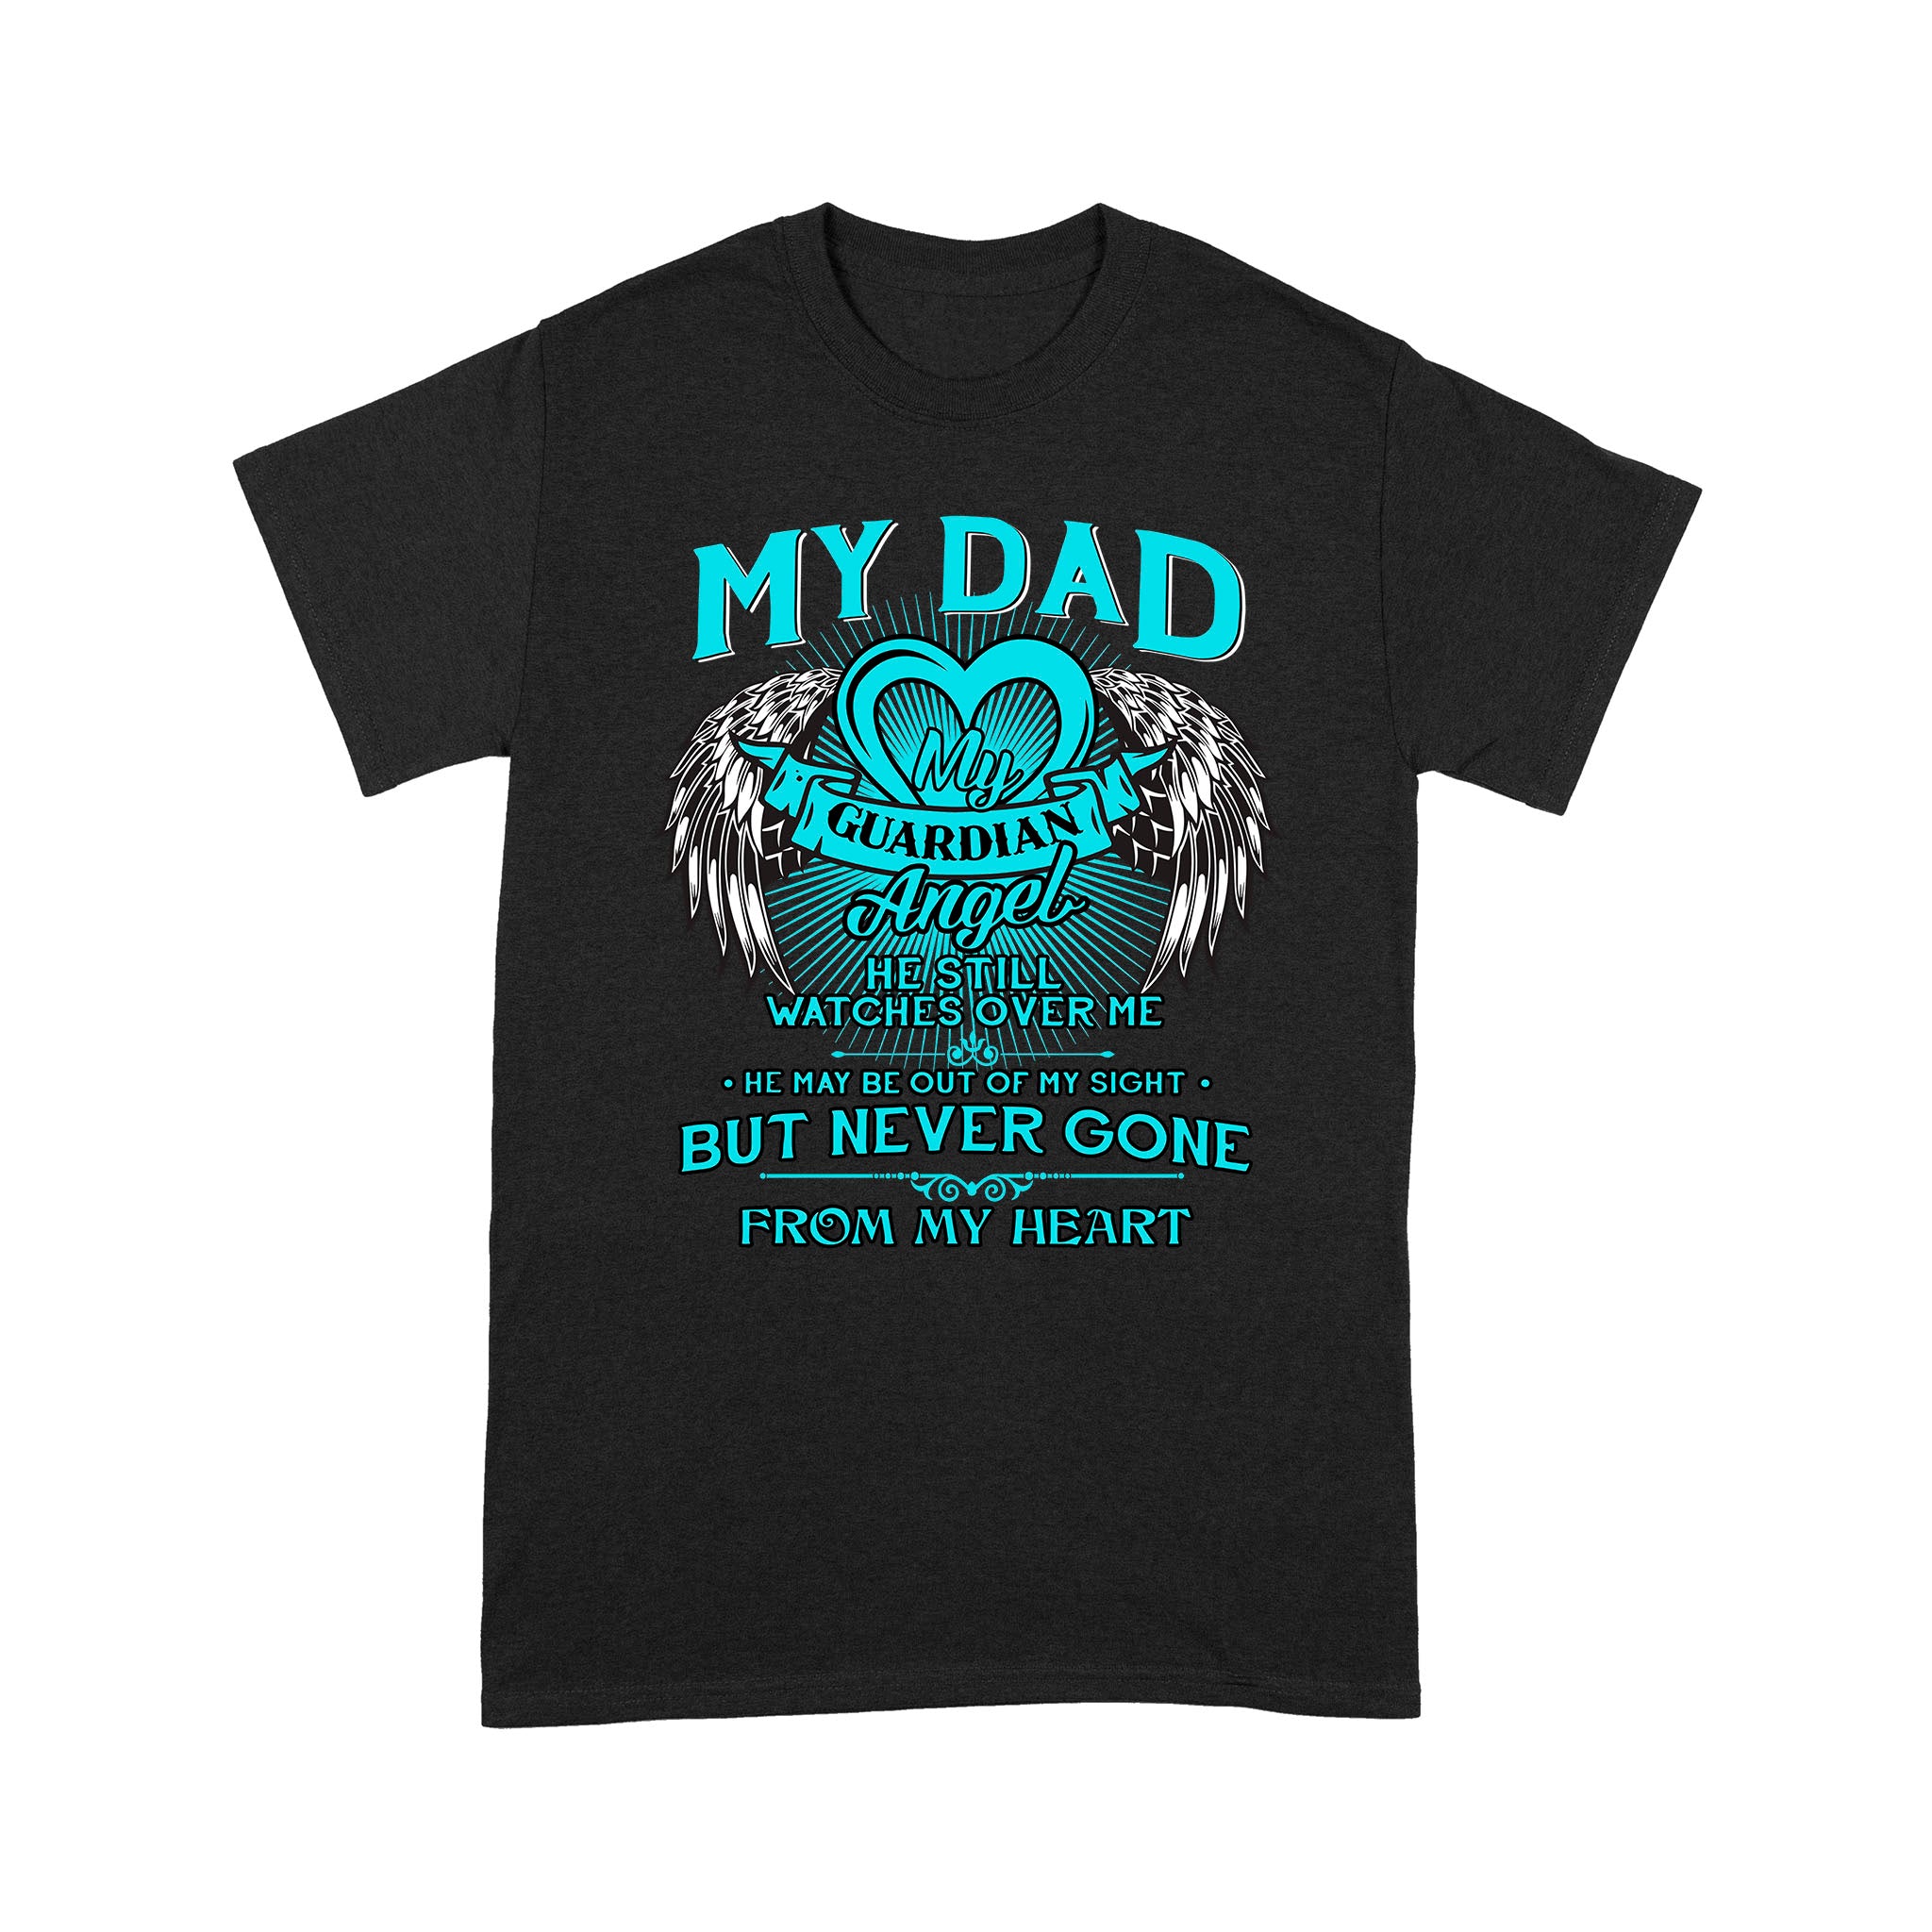 Memorial T-shirt Dad Remembrance| In Loving Memory Shirt| My Dad My Guardian Angel| Memorial Gift for Loss of Father| NTS133 Myfihu